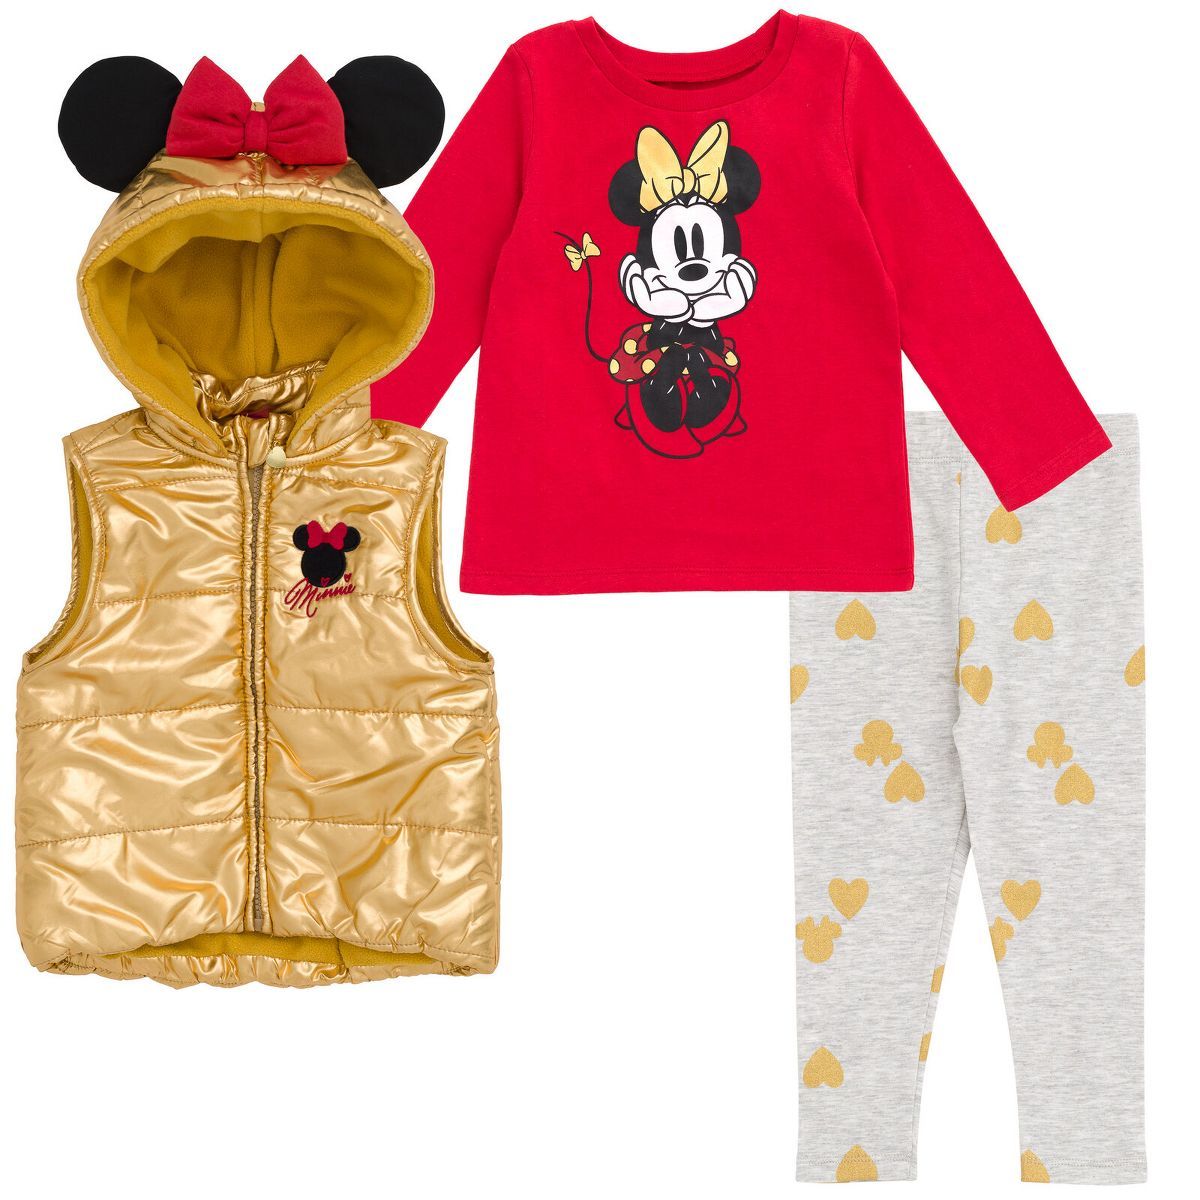 Disney Minnie Mouse Zip Up Vest Puffer T-Shirt and Leggings 3 Piece Outfit Set Infant to Big Kid | Target